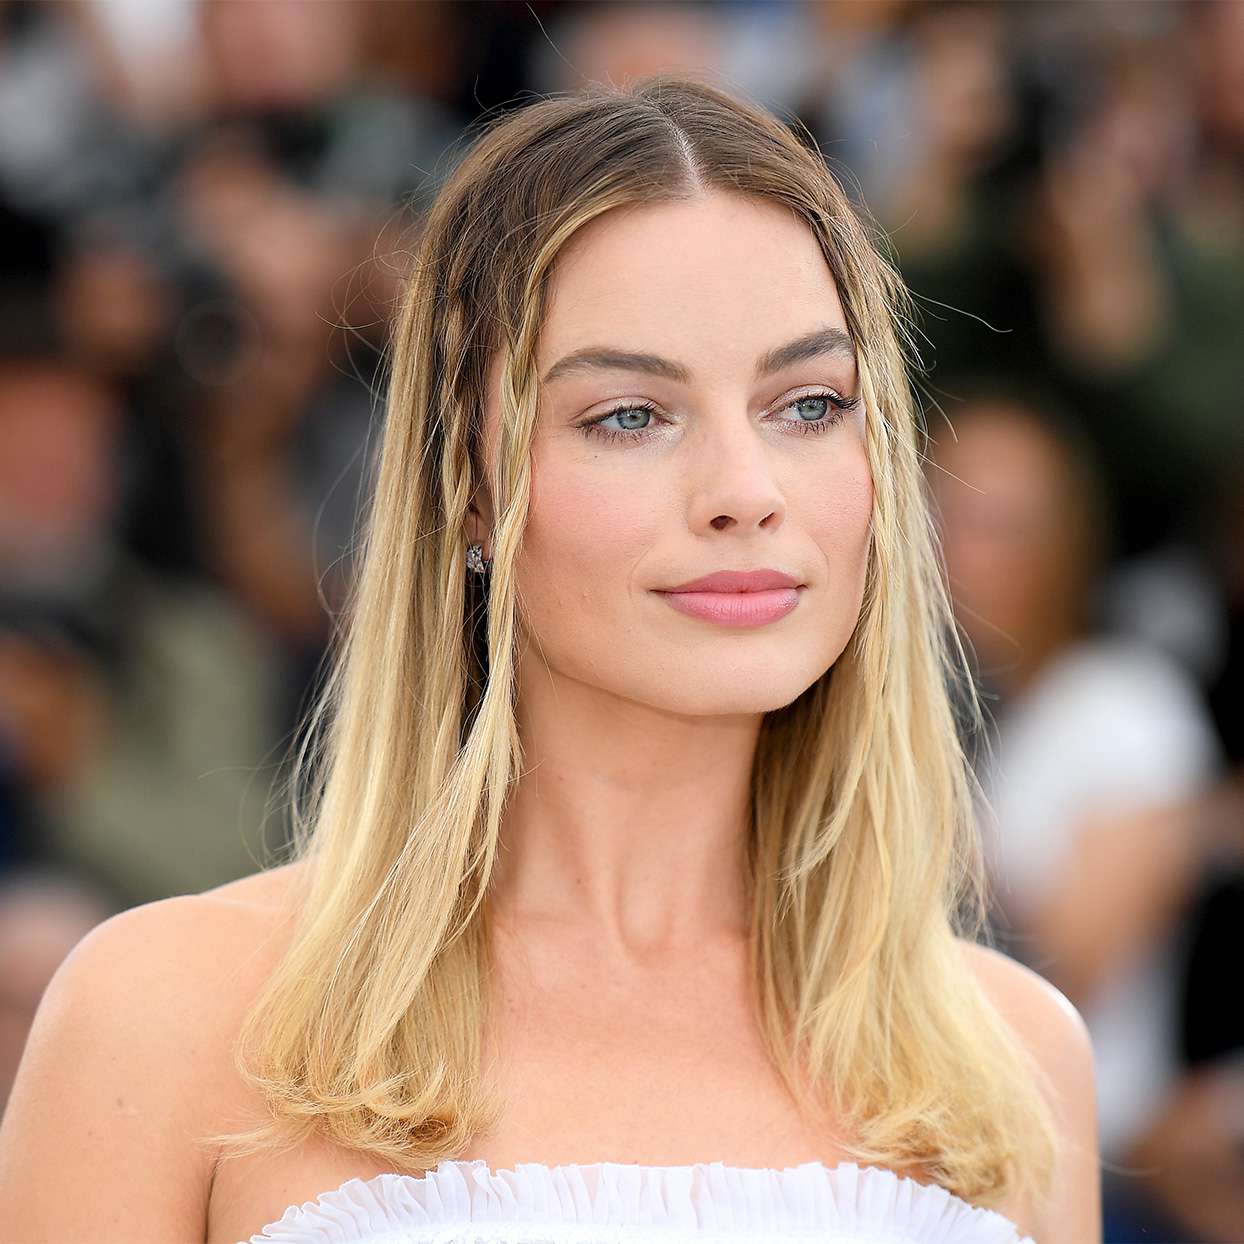 Margot Robbie 'Can't Live Without' These Skin-Care Pads&mdash;and They Smell Like a Peach Bellini